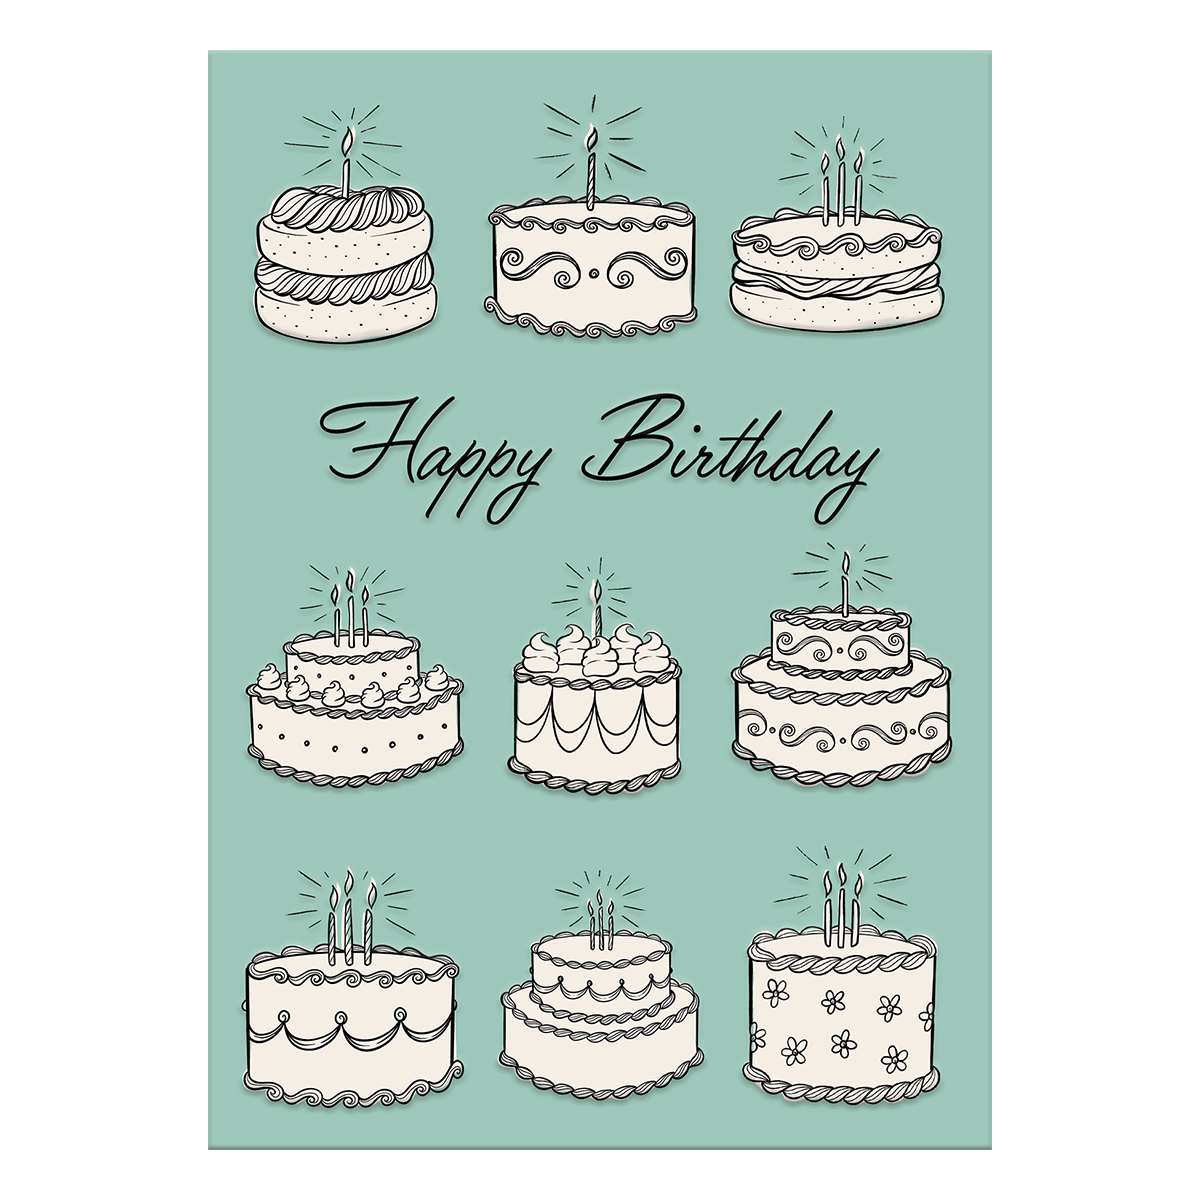 Linework Cakes Greeting Card Product